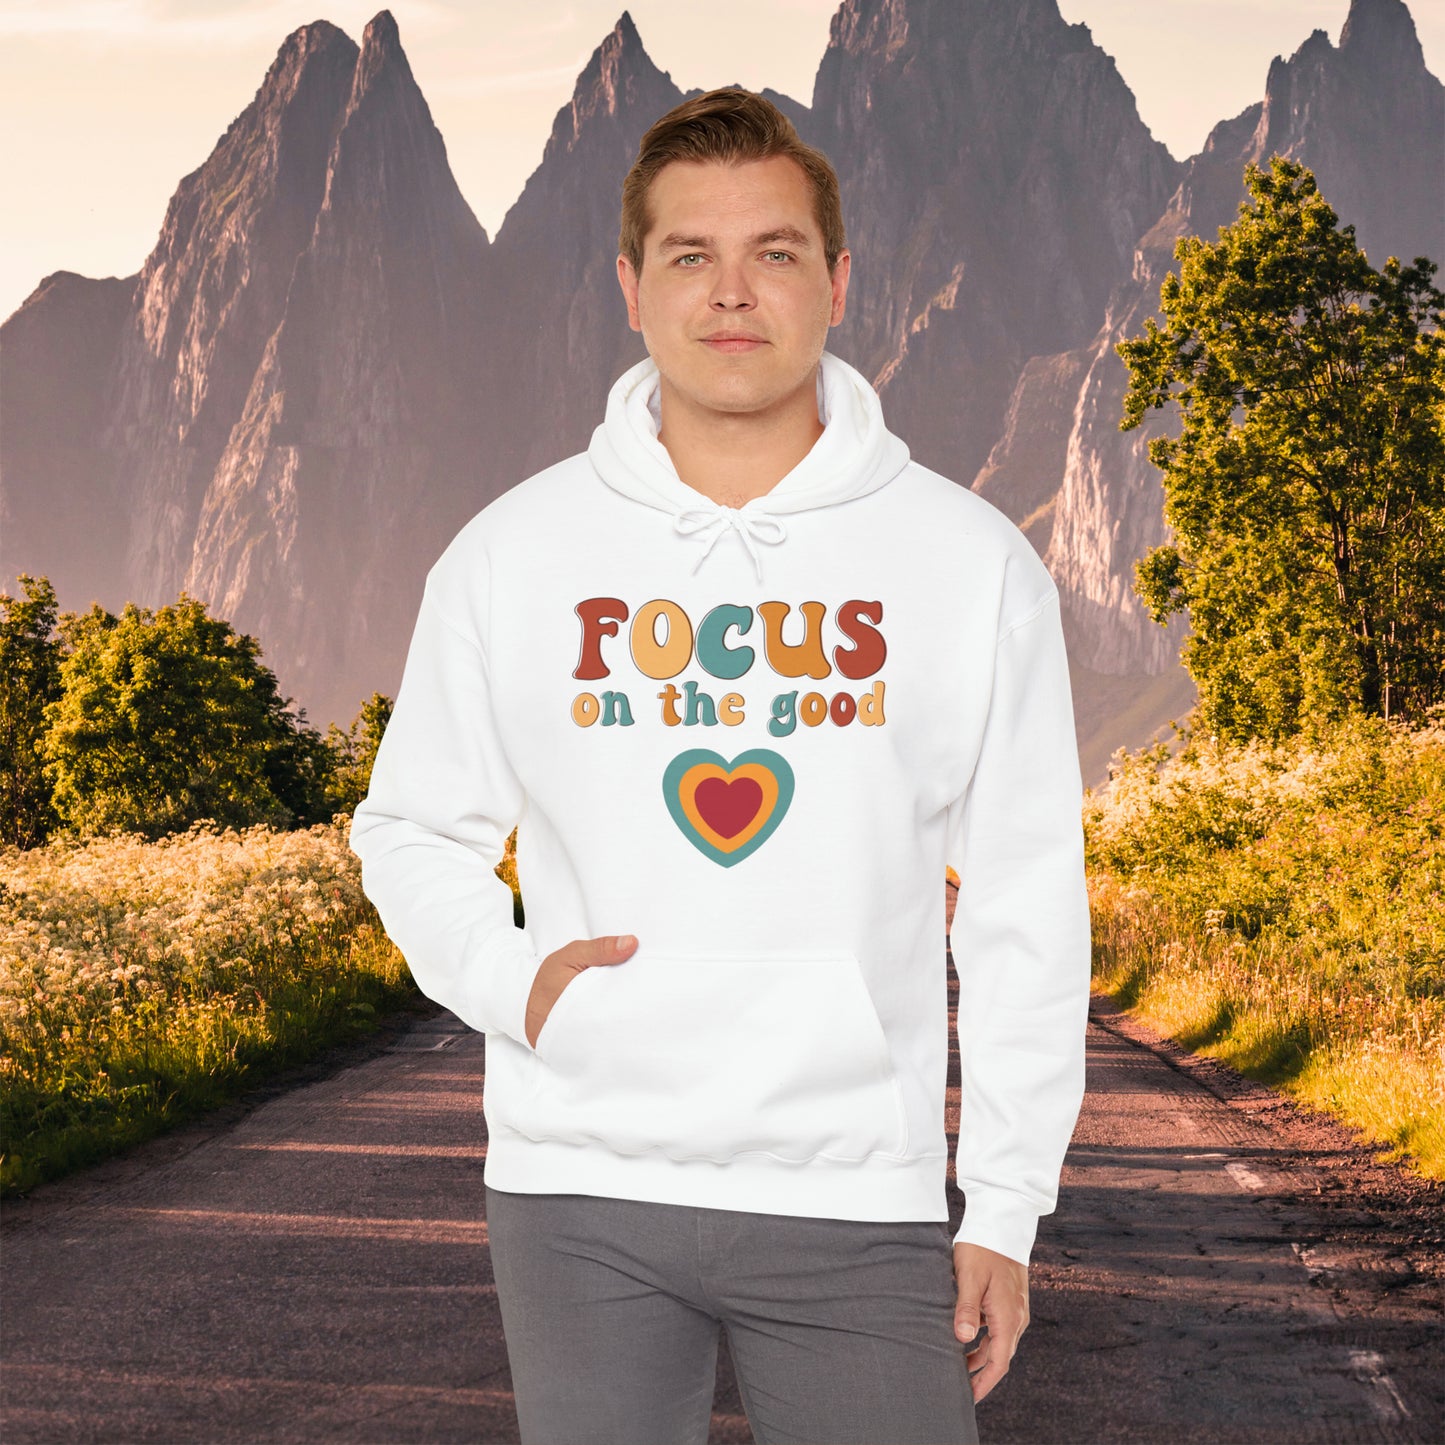 A colorful Focus on the good message on this Unisex Heavy Blend™ Hooded Sweatshirt